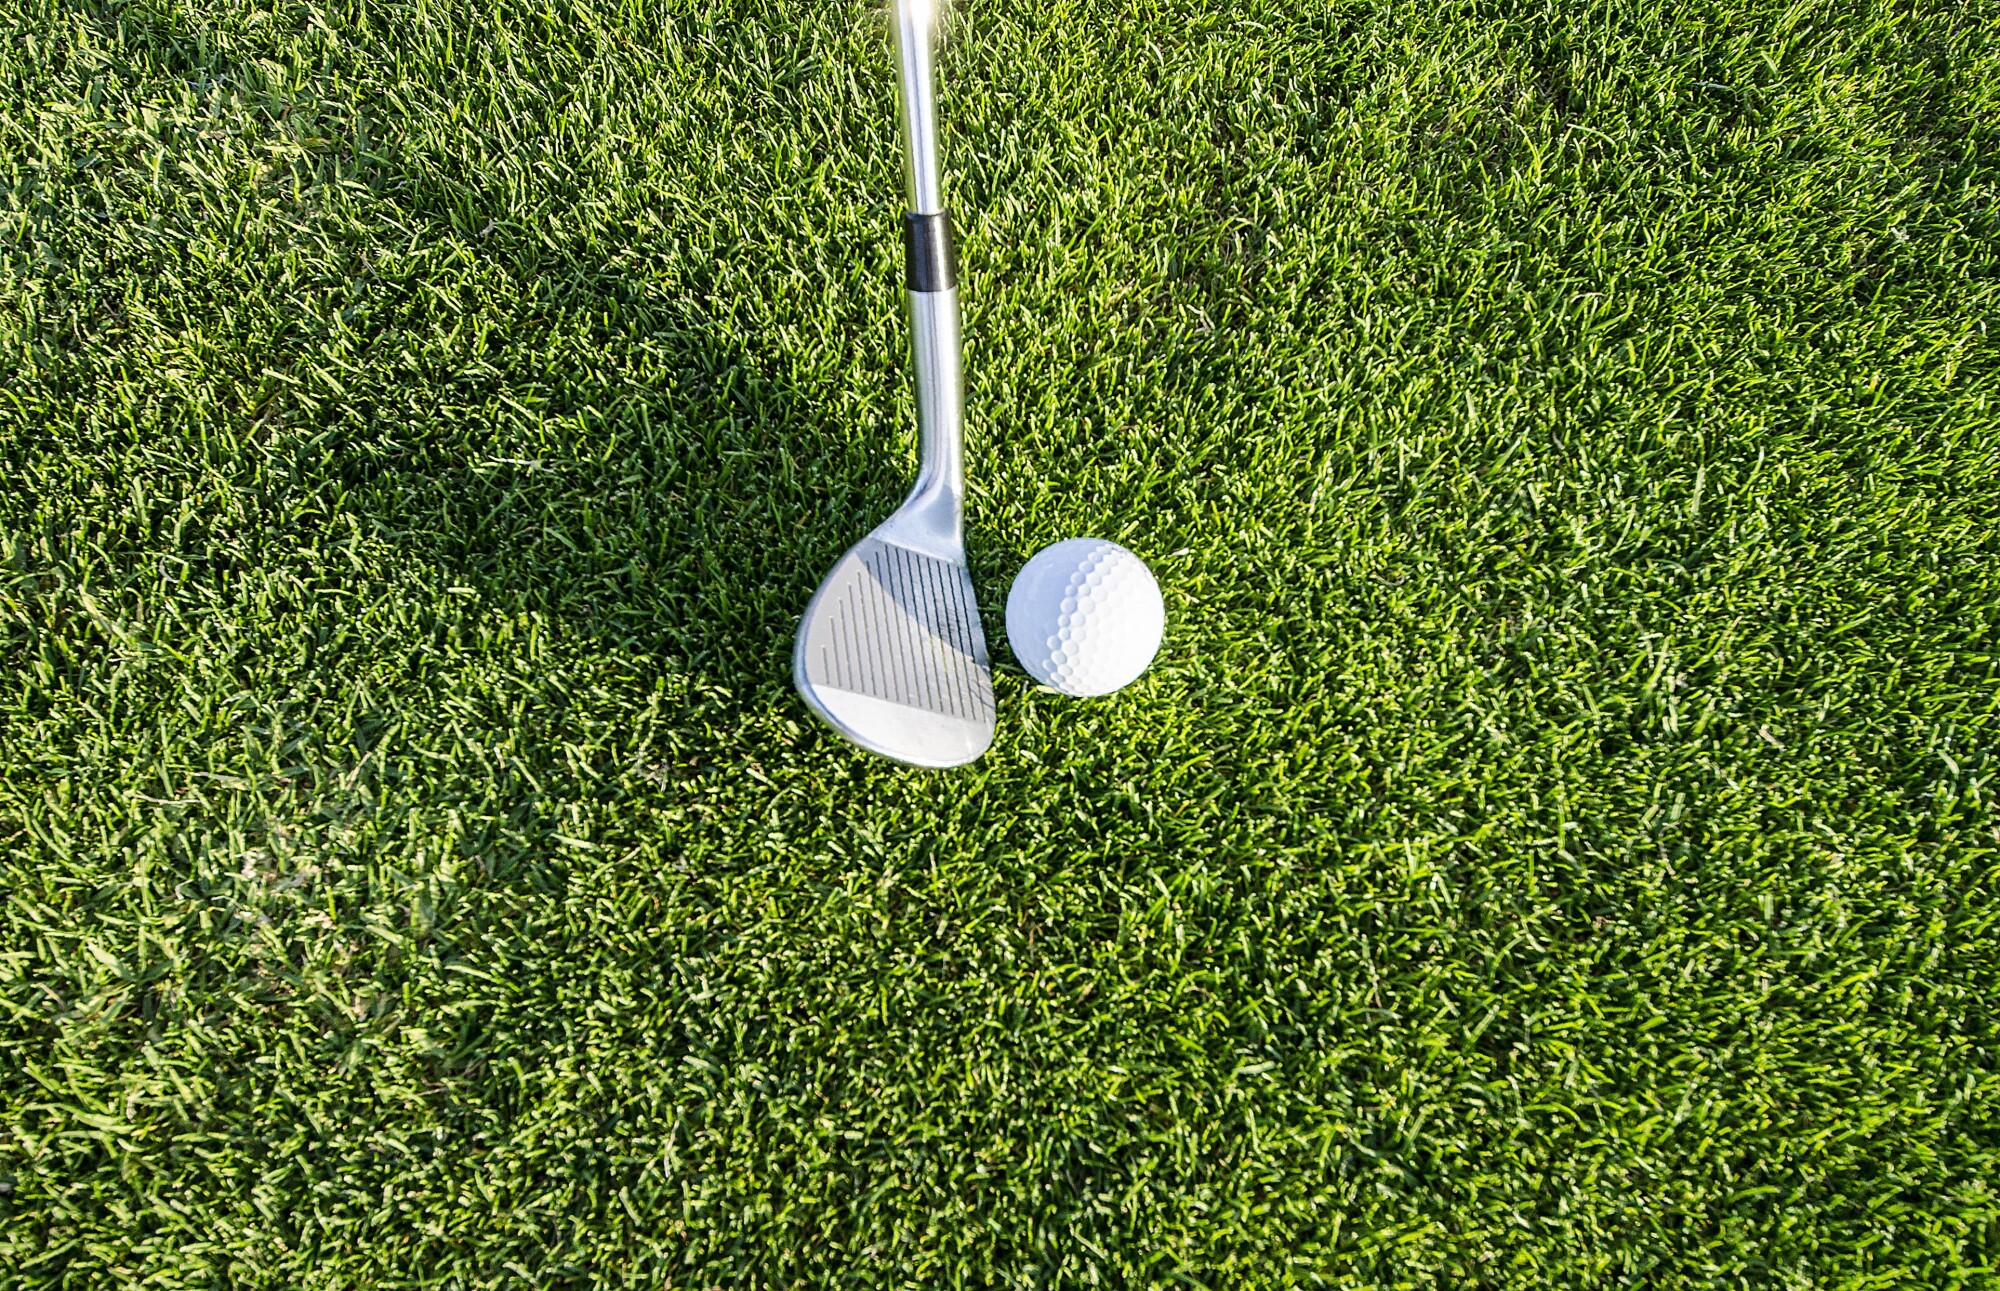 Tips on Improving Your Chipping